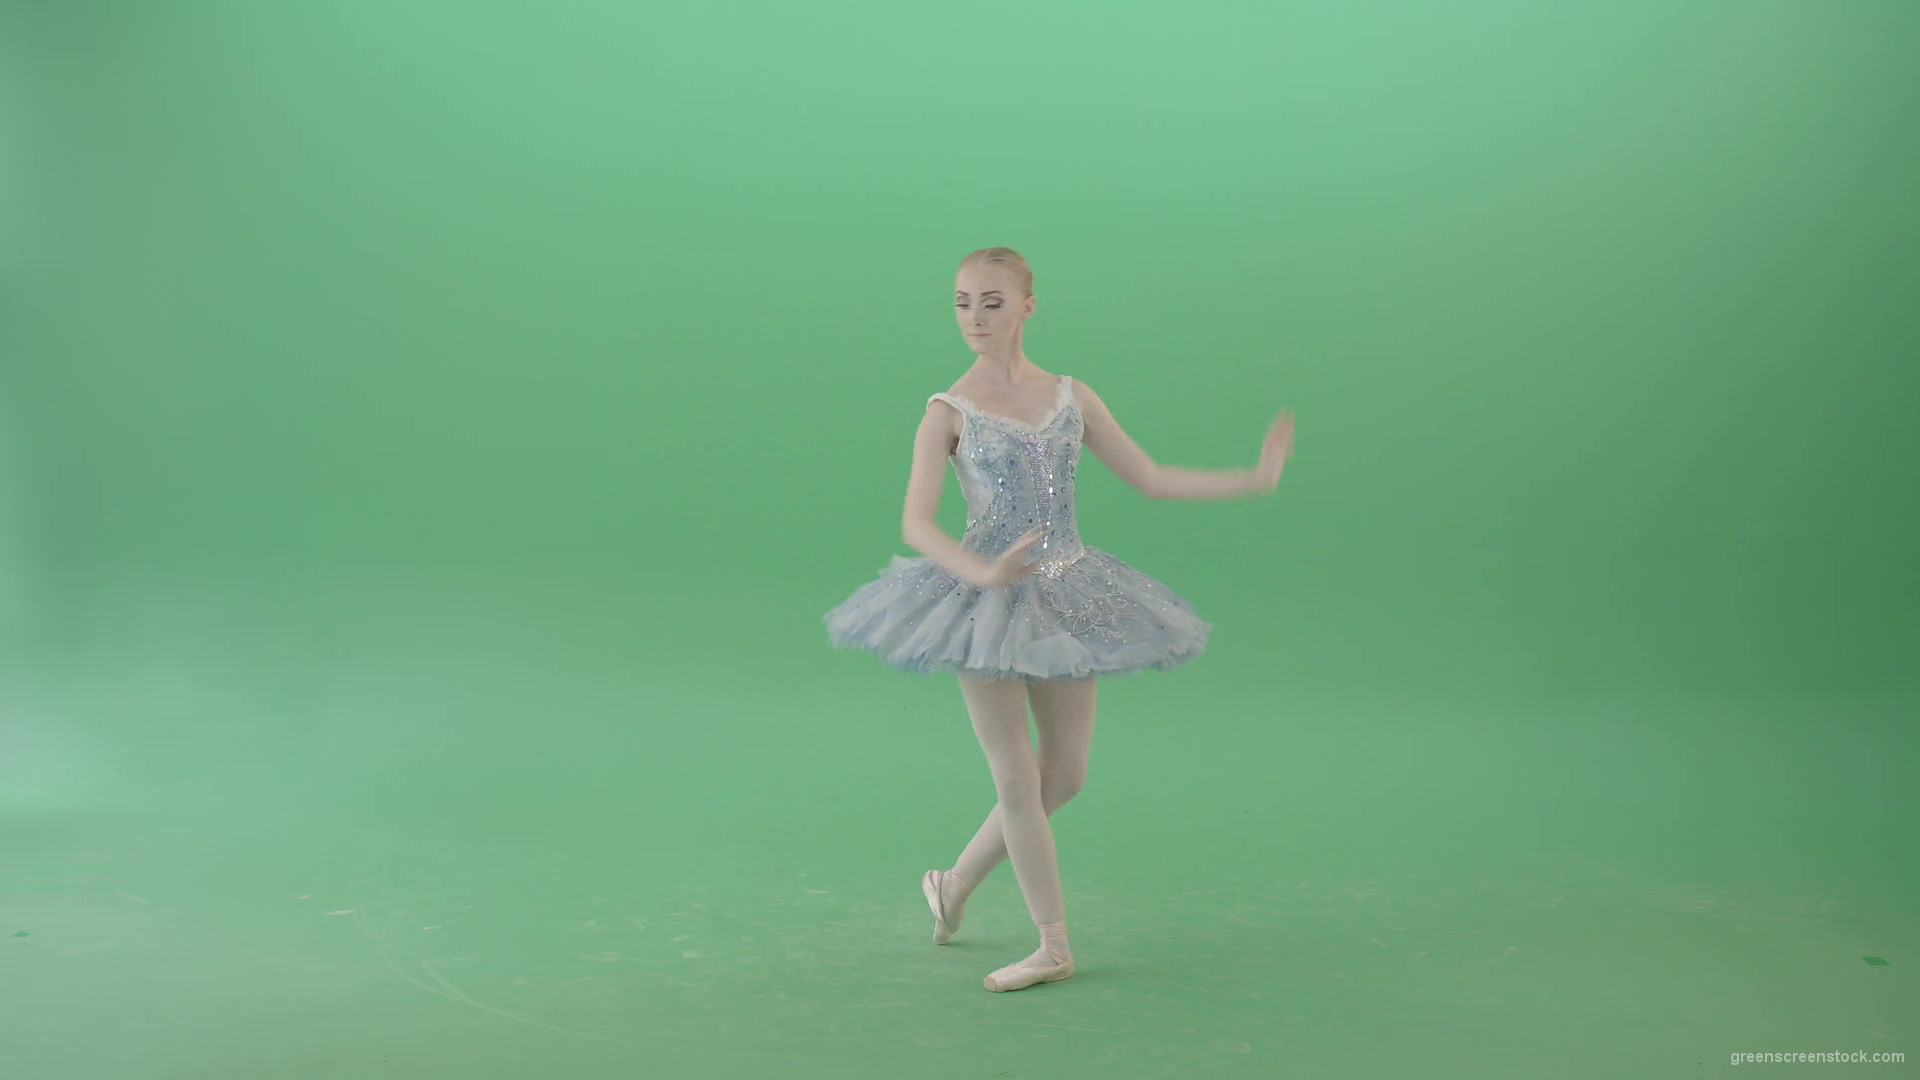 Christmas-story-baller-dancing-girl-in-blue-ballerin-dress-performing-isolated-on-green-screen-4K-Video-Footage-1920_009 Green Screen Stock